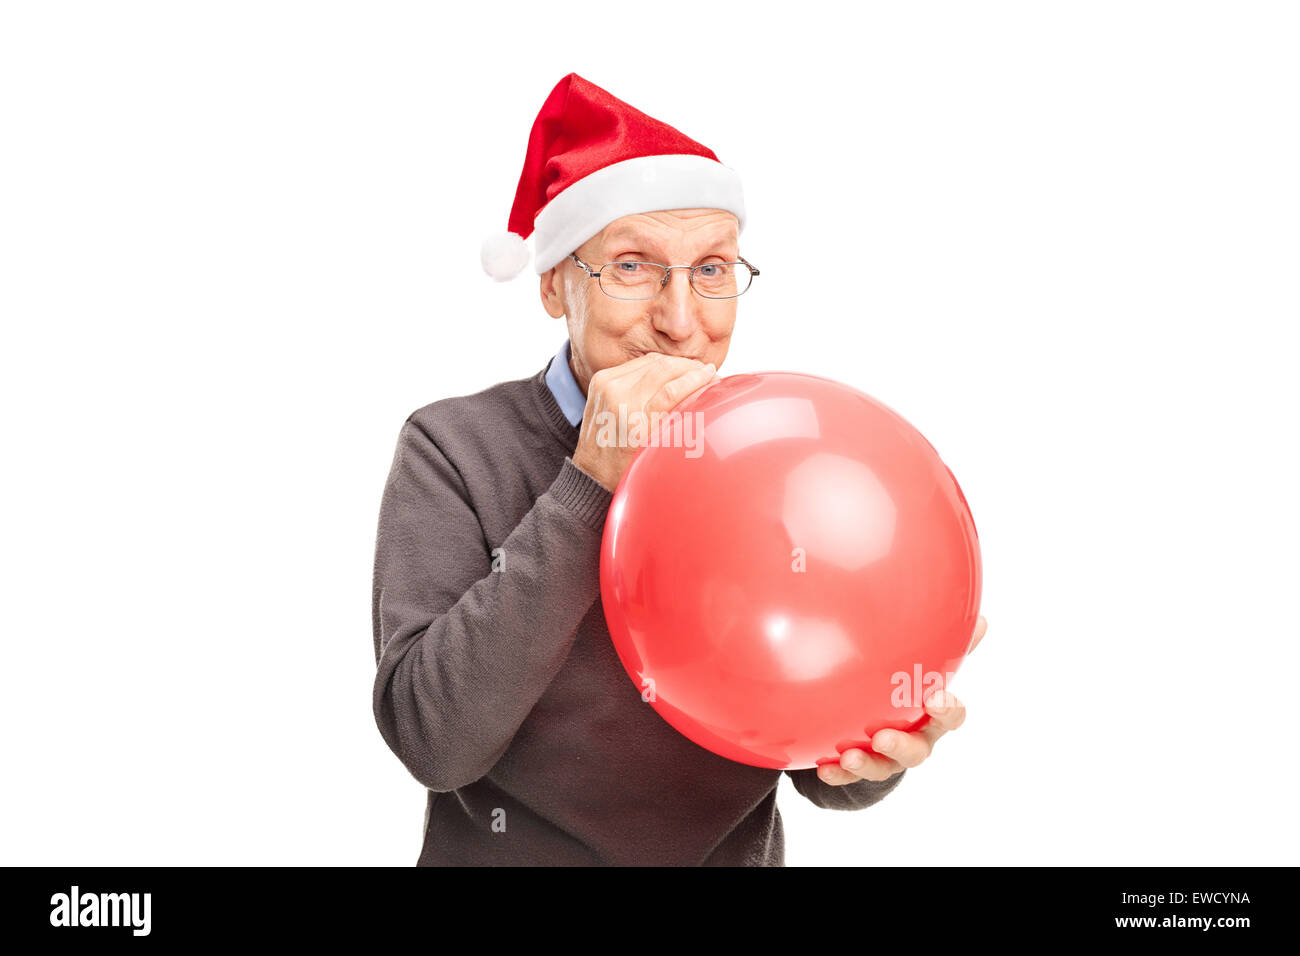 Cheerful senior with Santa hat blowing up a red balloon and looking at the camera isolated on white background Stock Photo